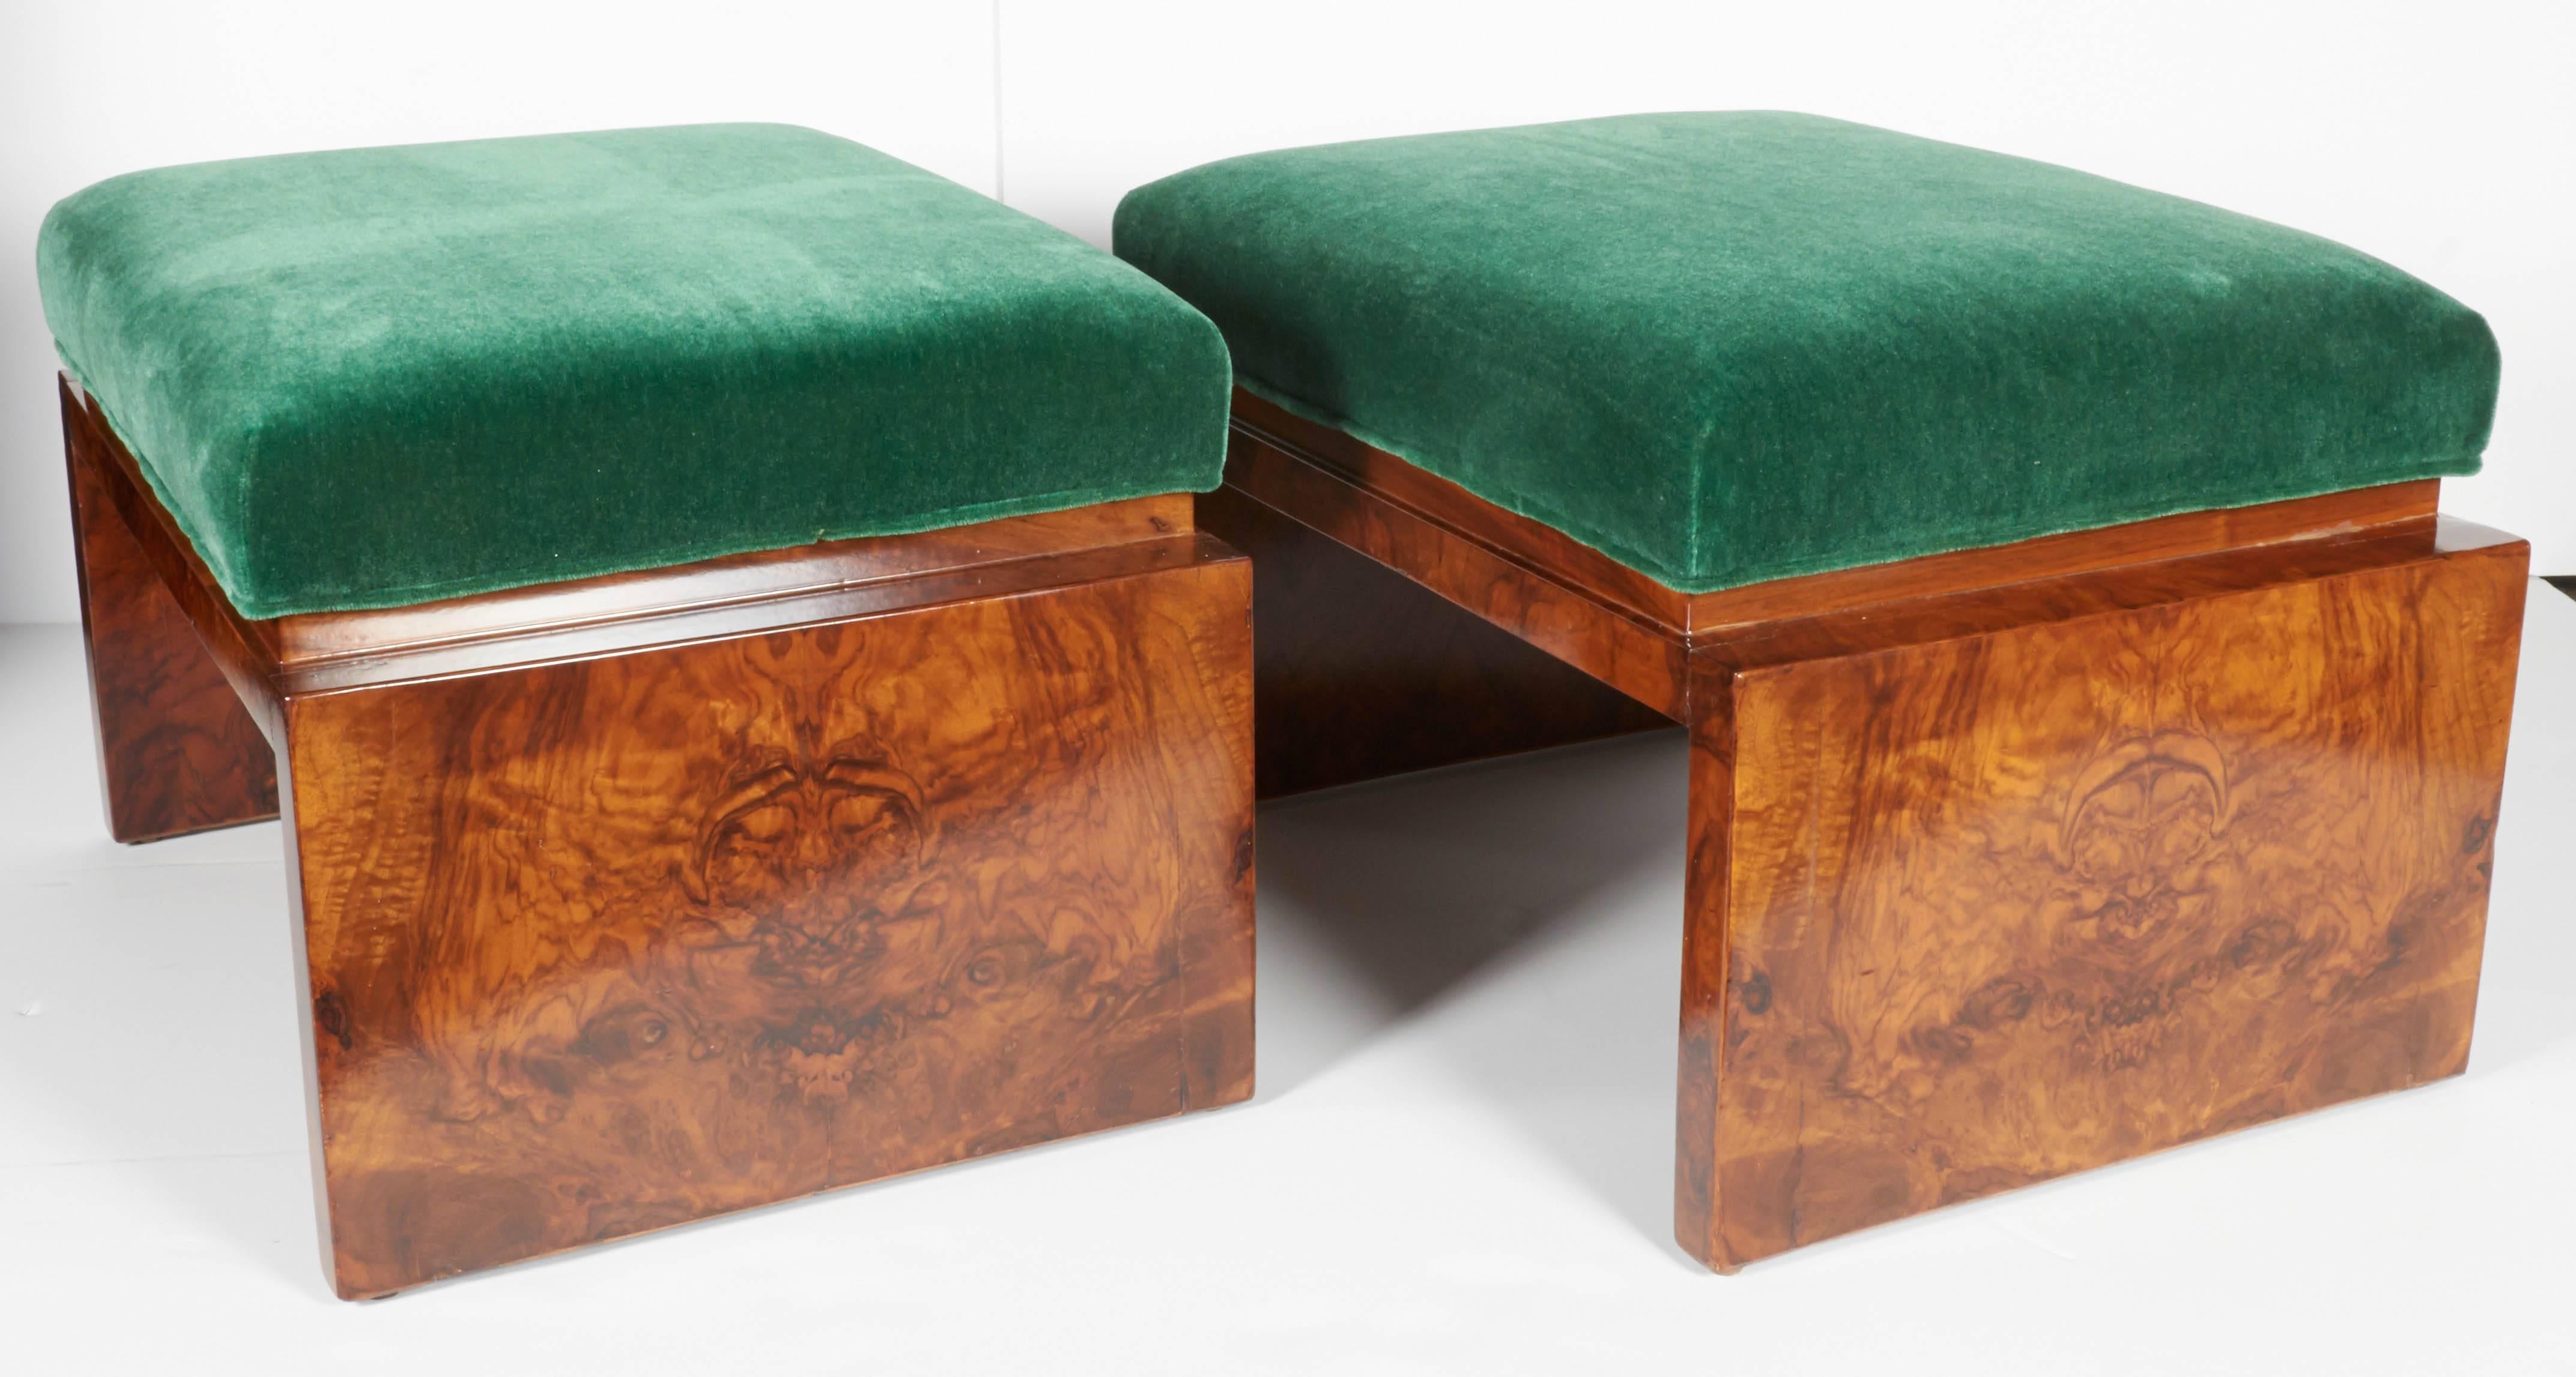 Exquisite English deco benches in bookmatched burled Carpathian elmwood. The benches feature a streamline base design with rectangular cushions, newly upholstered in luxurious emerald green mohair. The benches can also serve as ottomans. Rich in